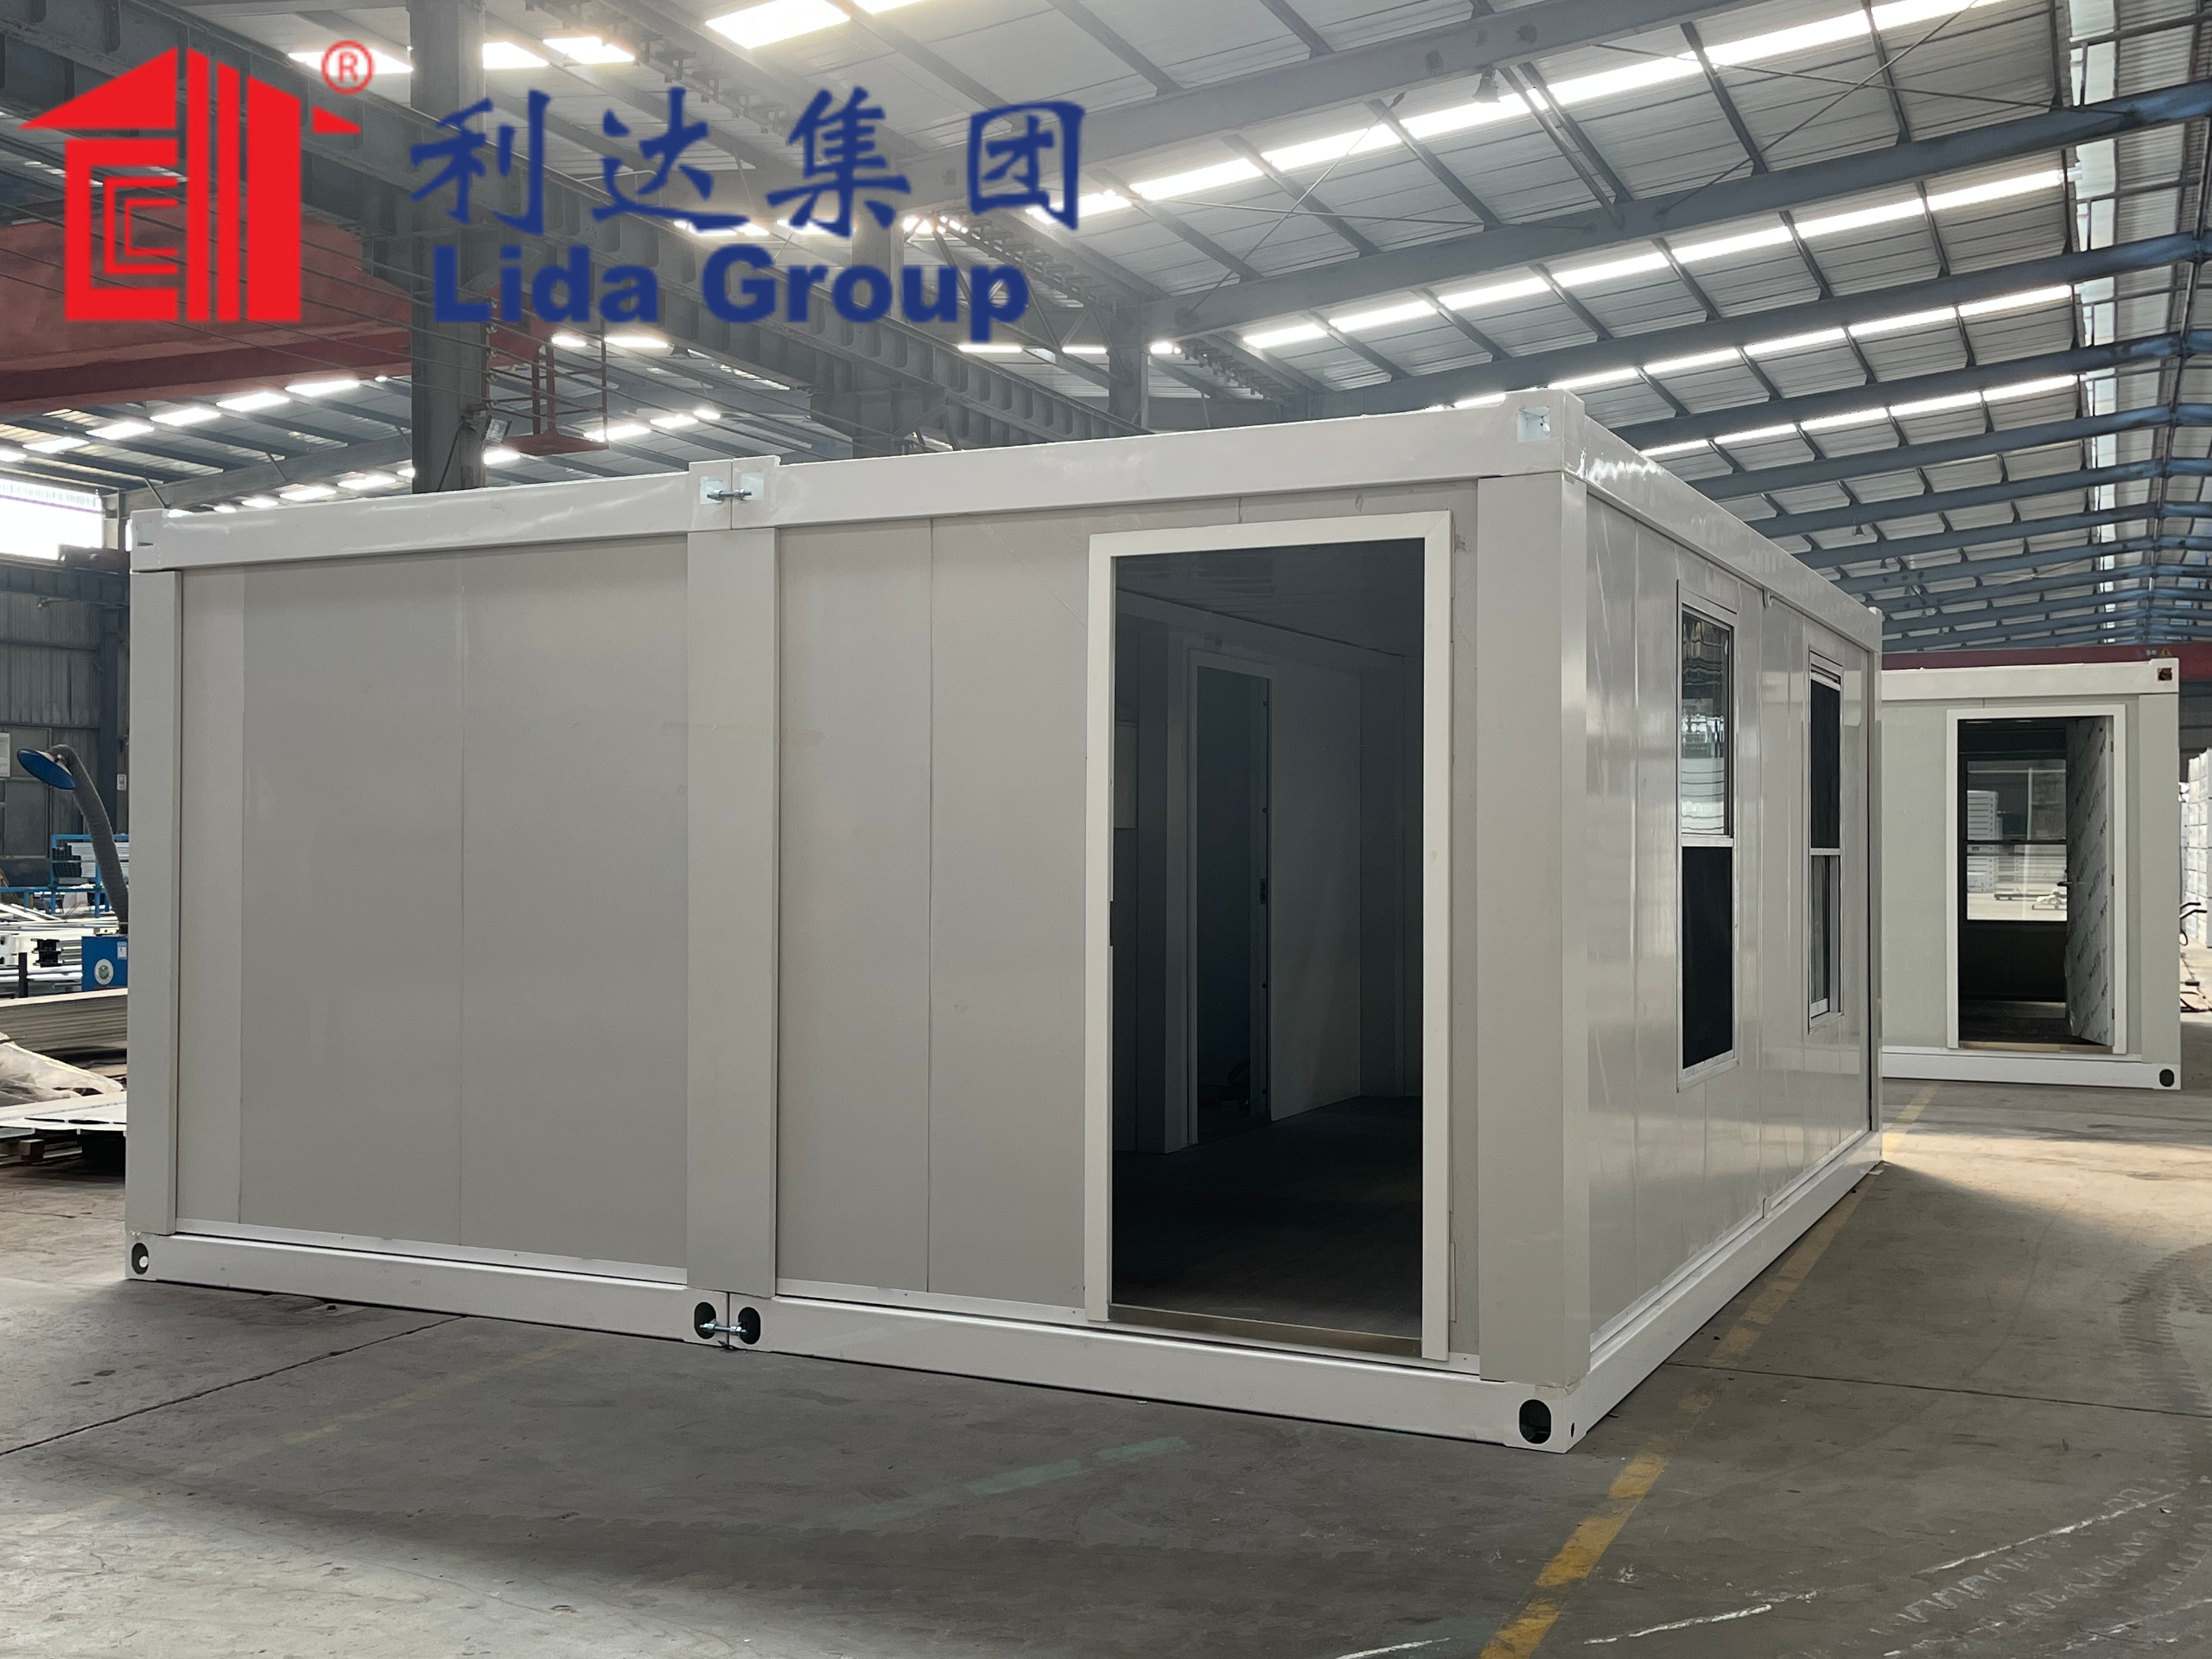 Temporary Offices Portable Prefabricated Container House Prefab House Portable Mobile House Container House